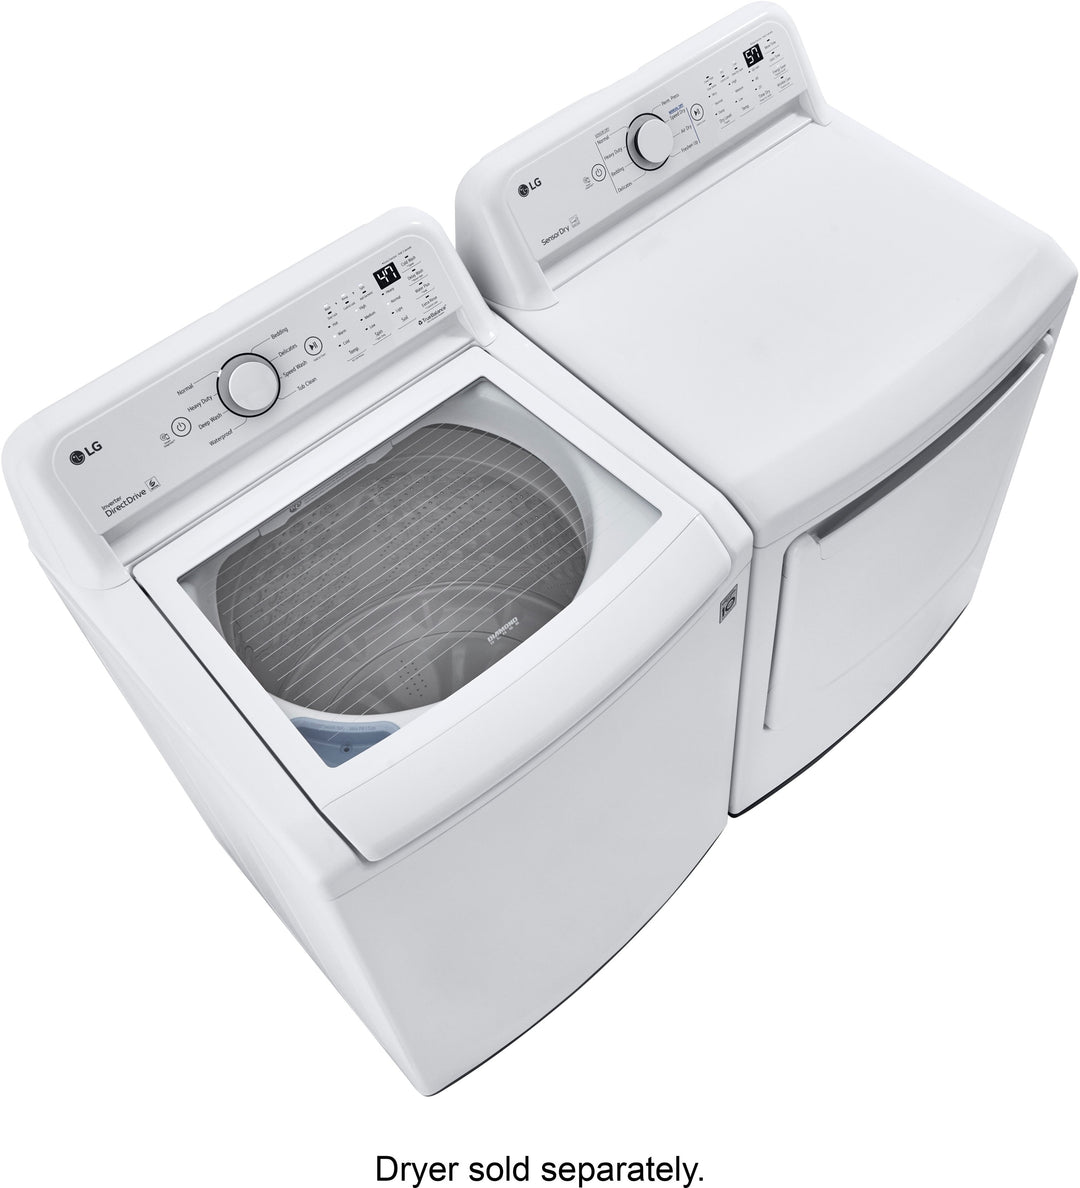 LG - 4.5 Cu. Ft. Smart Top Load Washer with Vibration Reduction and TurboDrum Technology - White_21